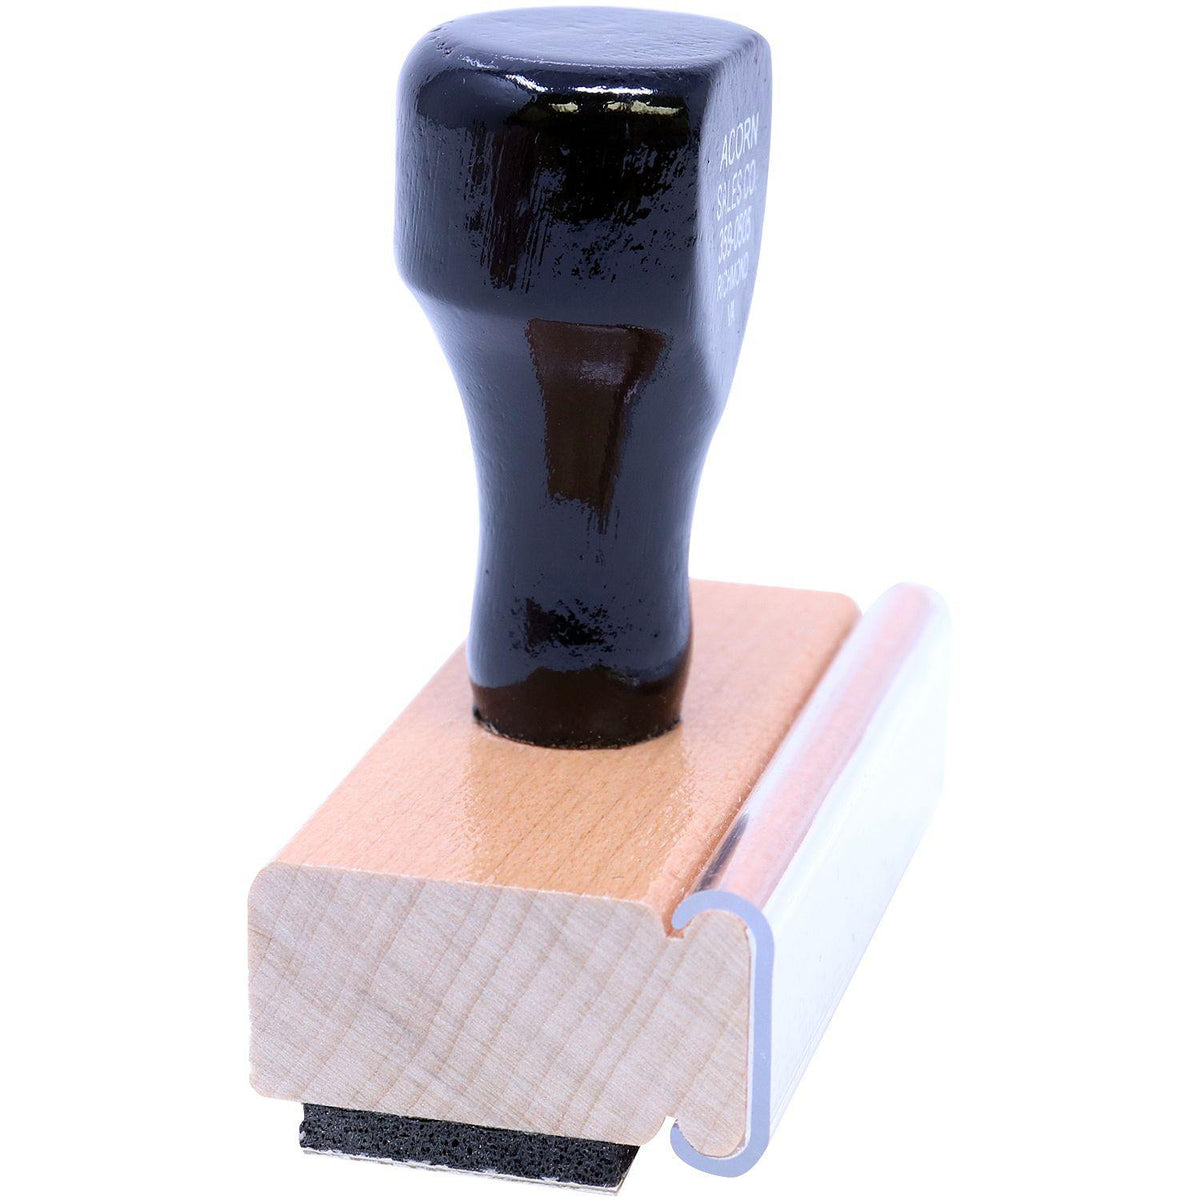 Not In Budget Rubber Stamp - Engineer Seal Stamps - Brand_Acorn, Impression Size_Small, Stamp Type_Regular Stamp, Type of Use_Business, Type of Use_Finance, Type of Use_Professional